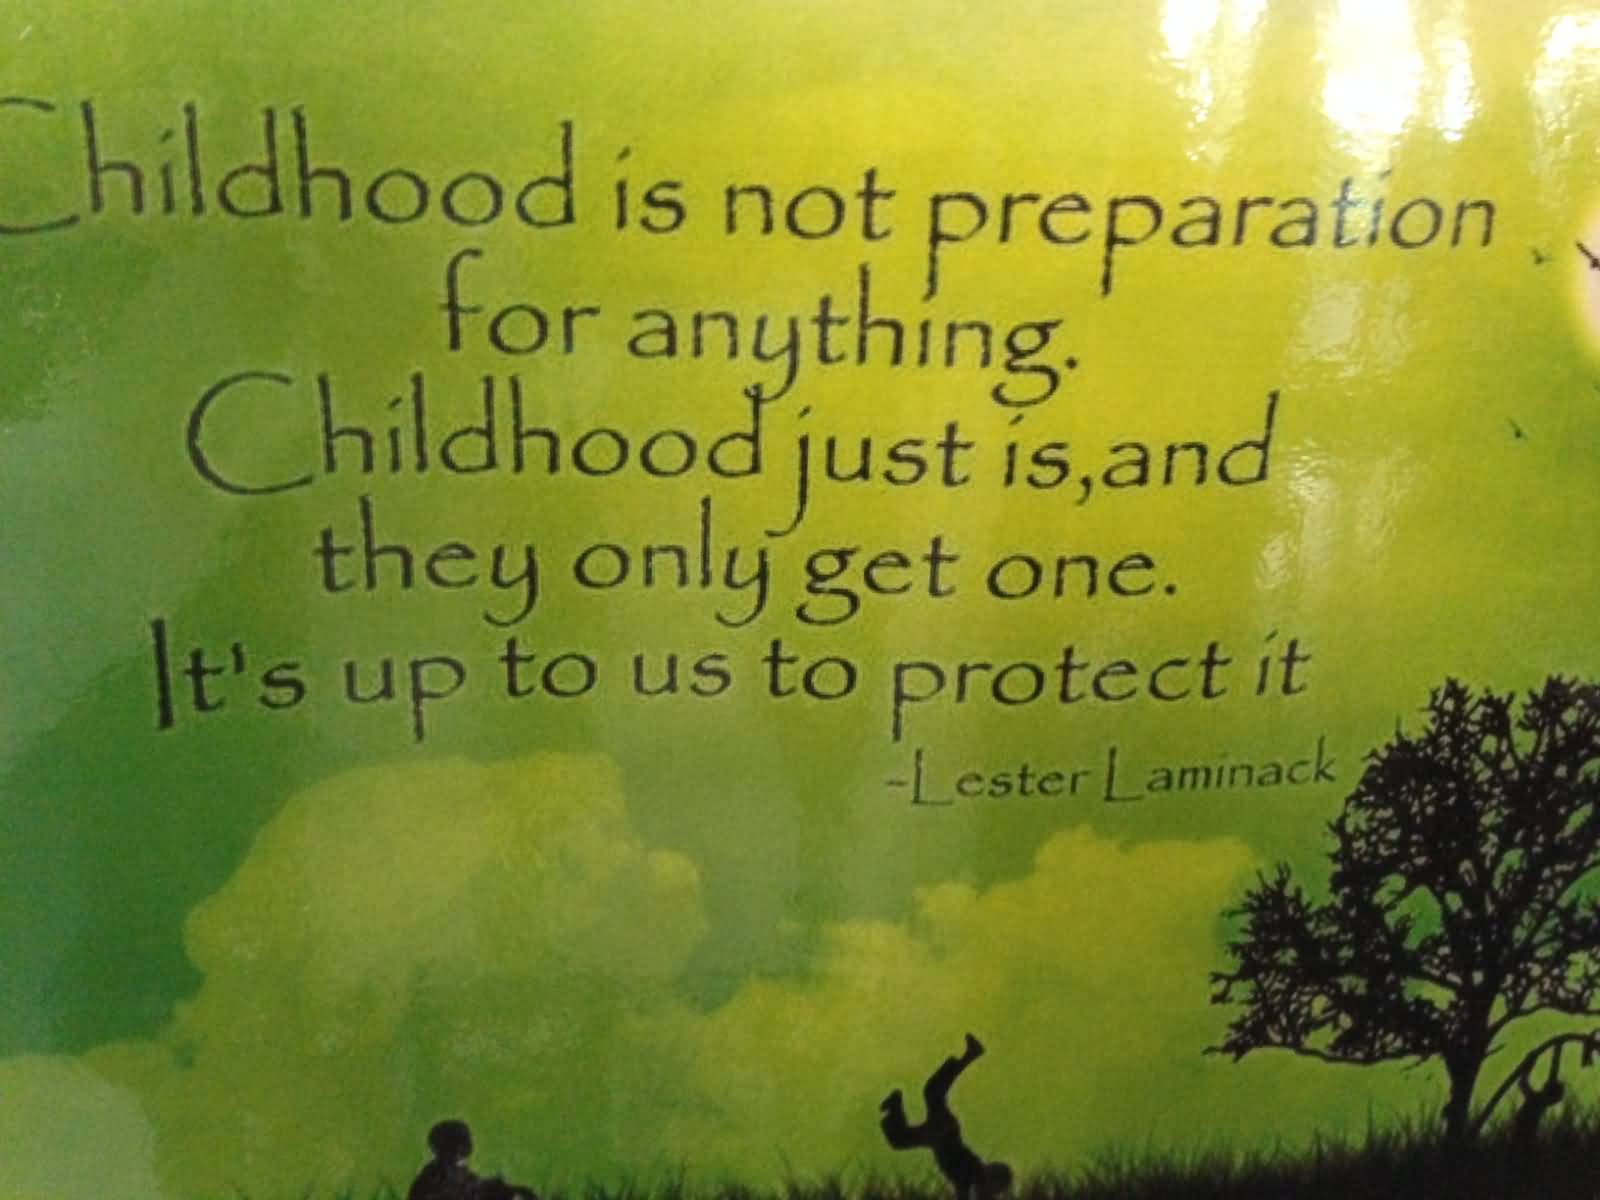 Childhood is not preparation for anything. Childhood just is, and they only get one. It's up to us to protect it - Lester Laminack